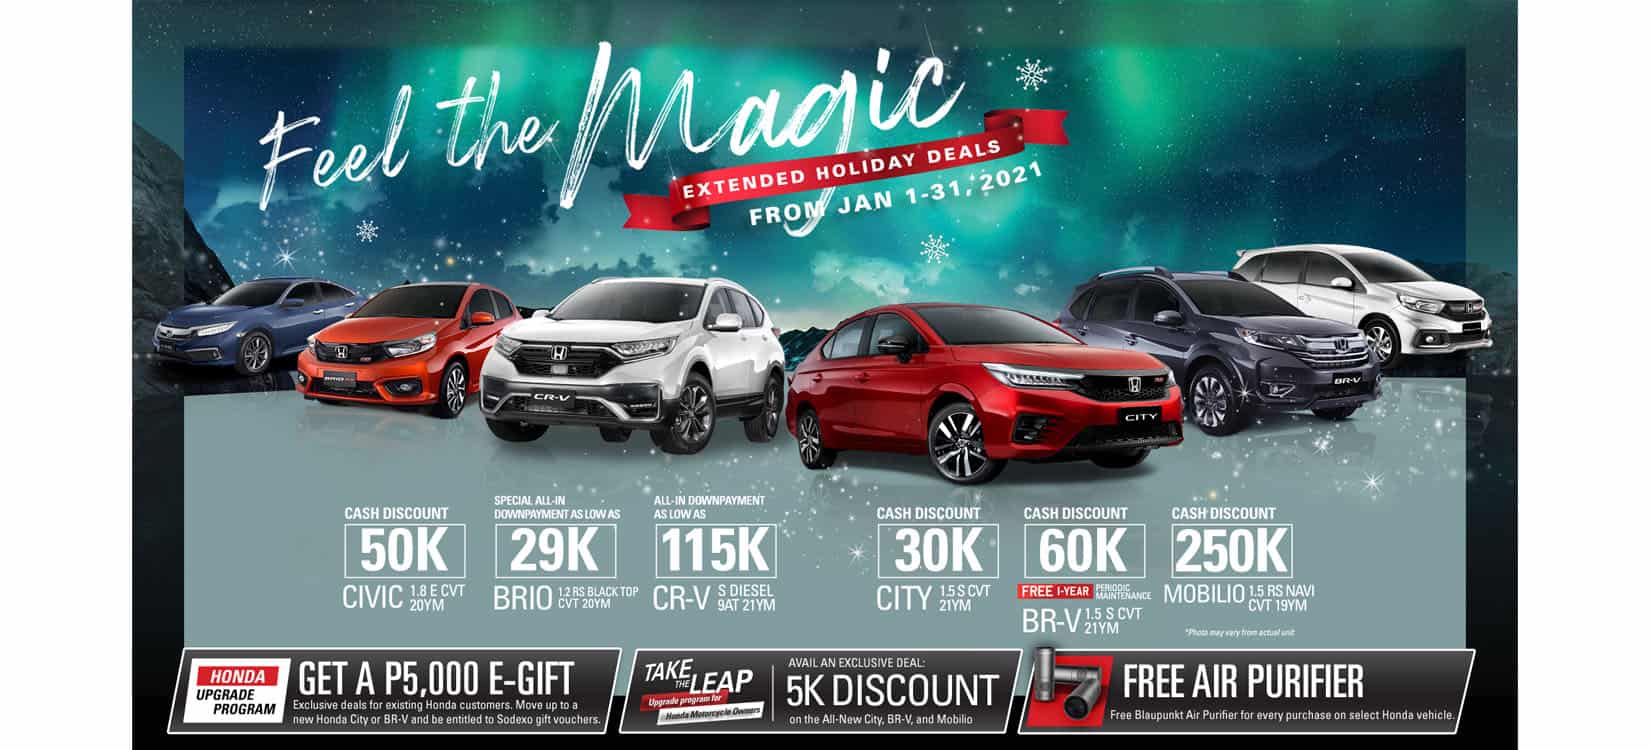 Honda Cars Philippines Honda Extends The Holidays With New Promos This January